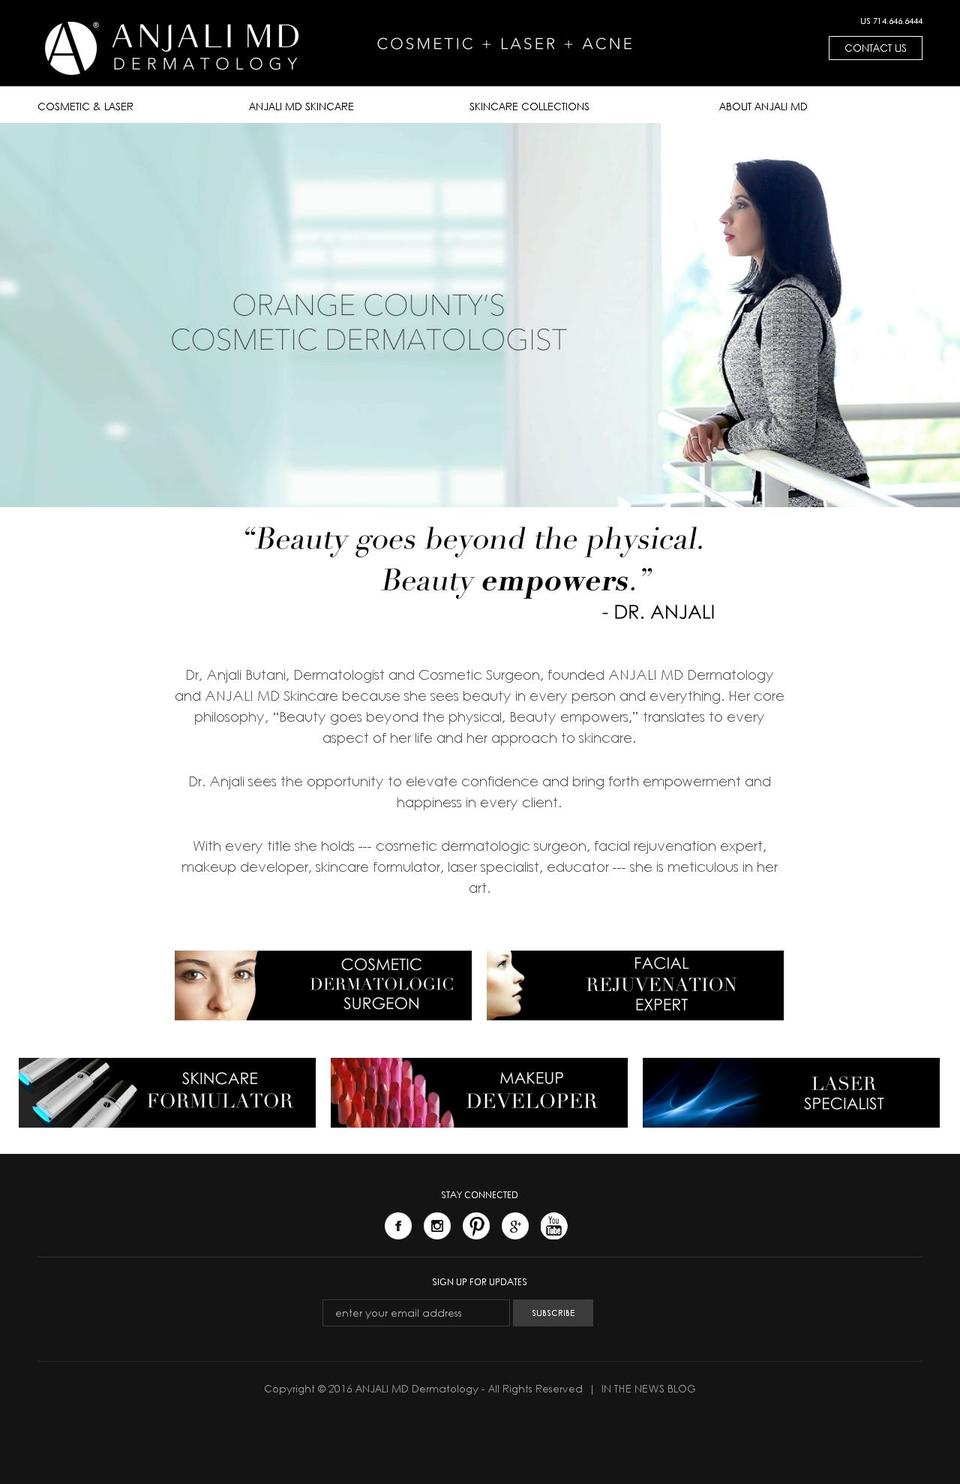 Anjali MD Site 2016 Shopify theme site example oclaserfacelift.info